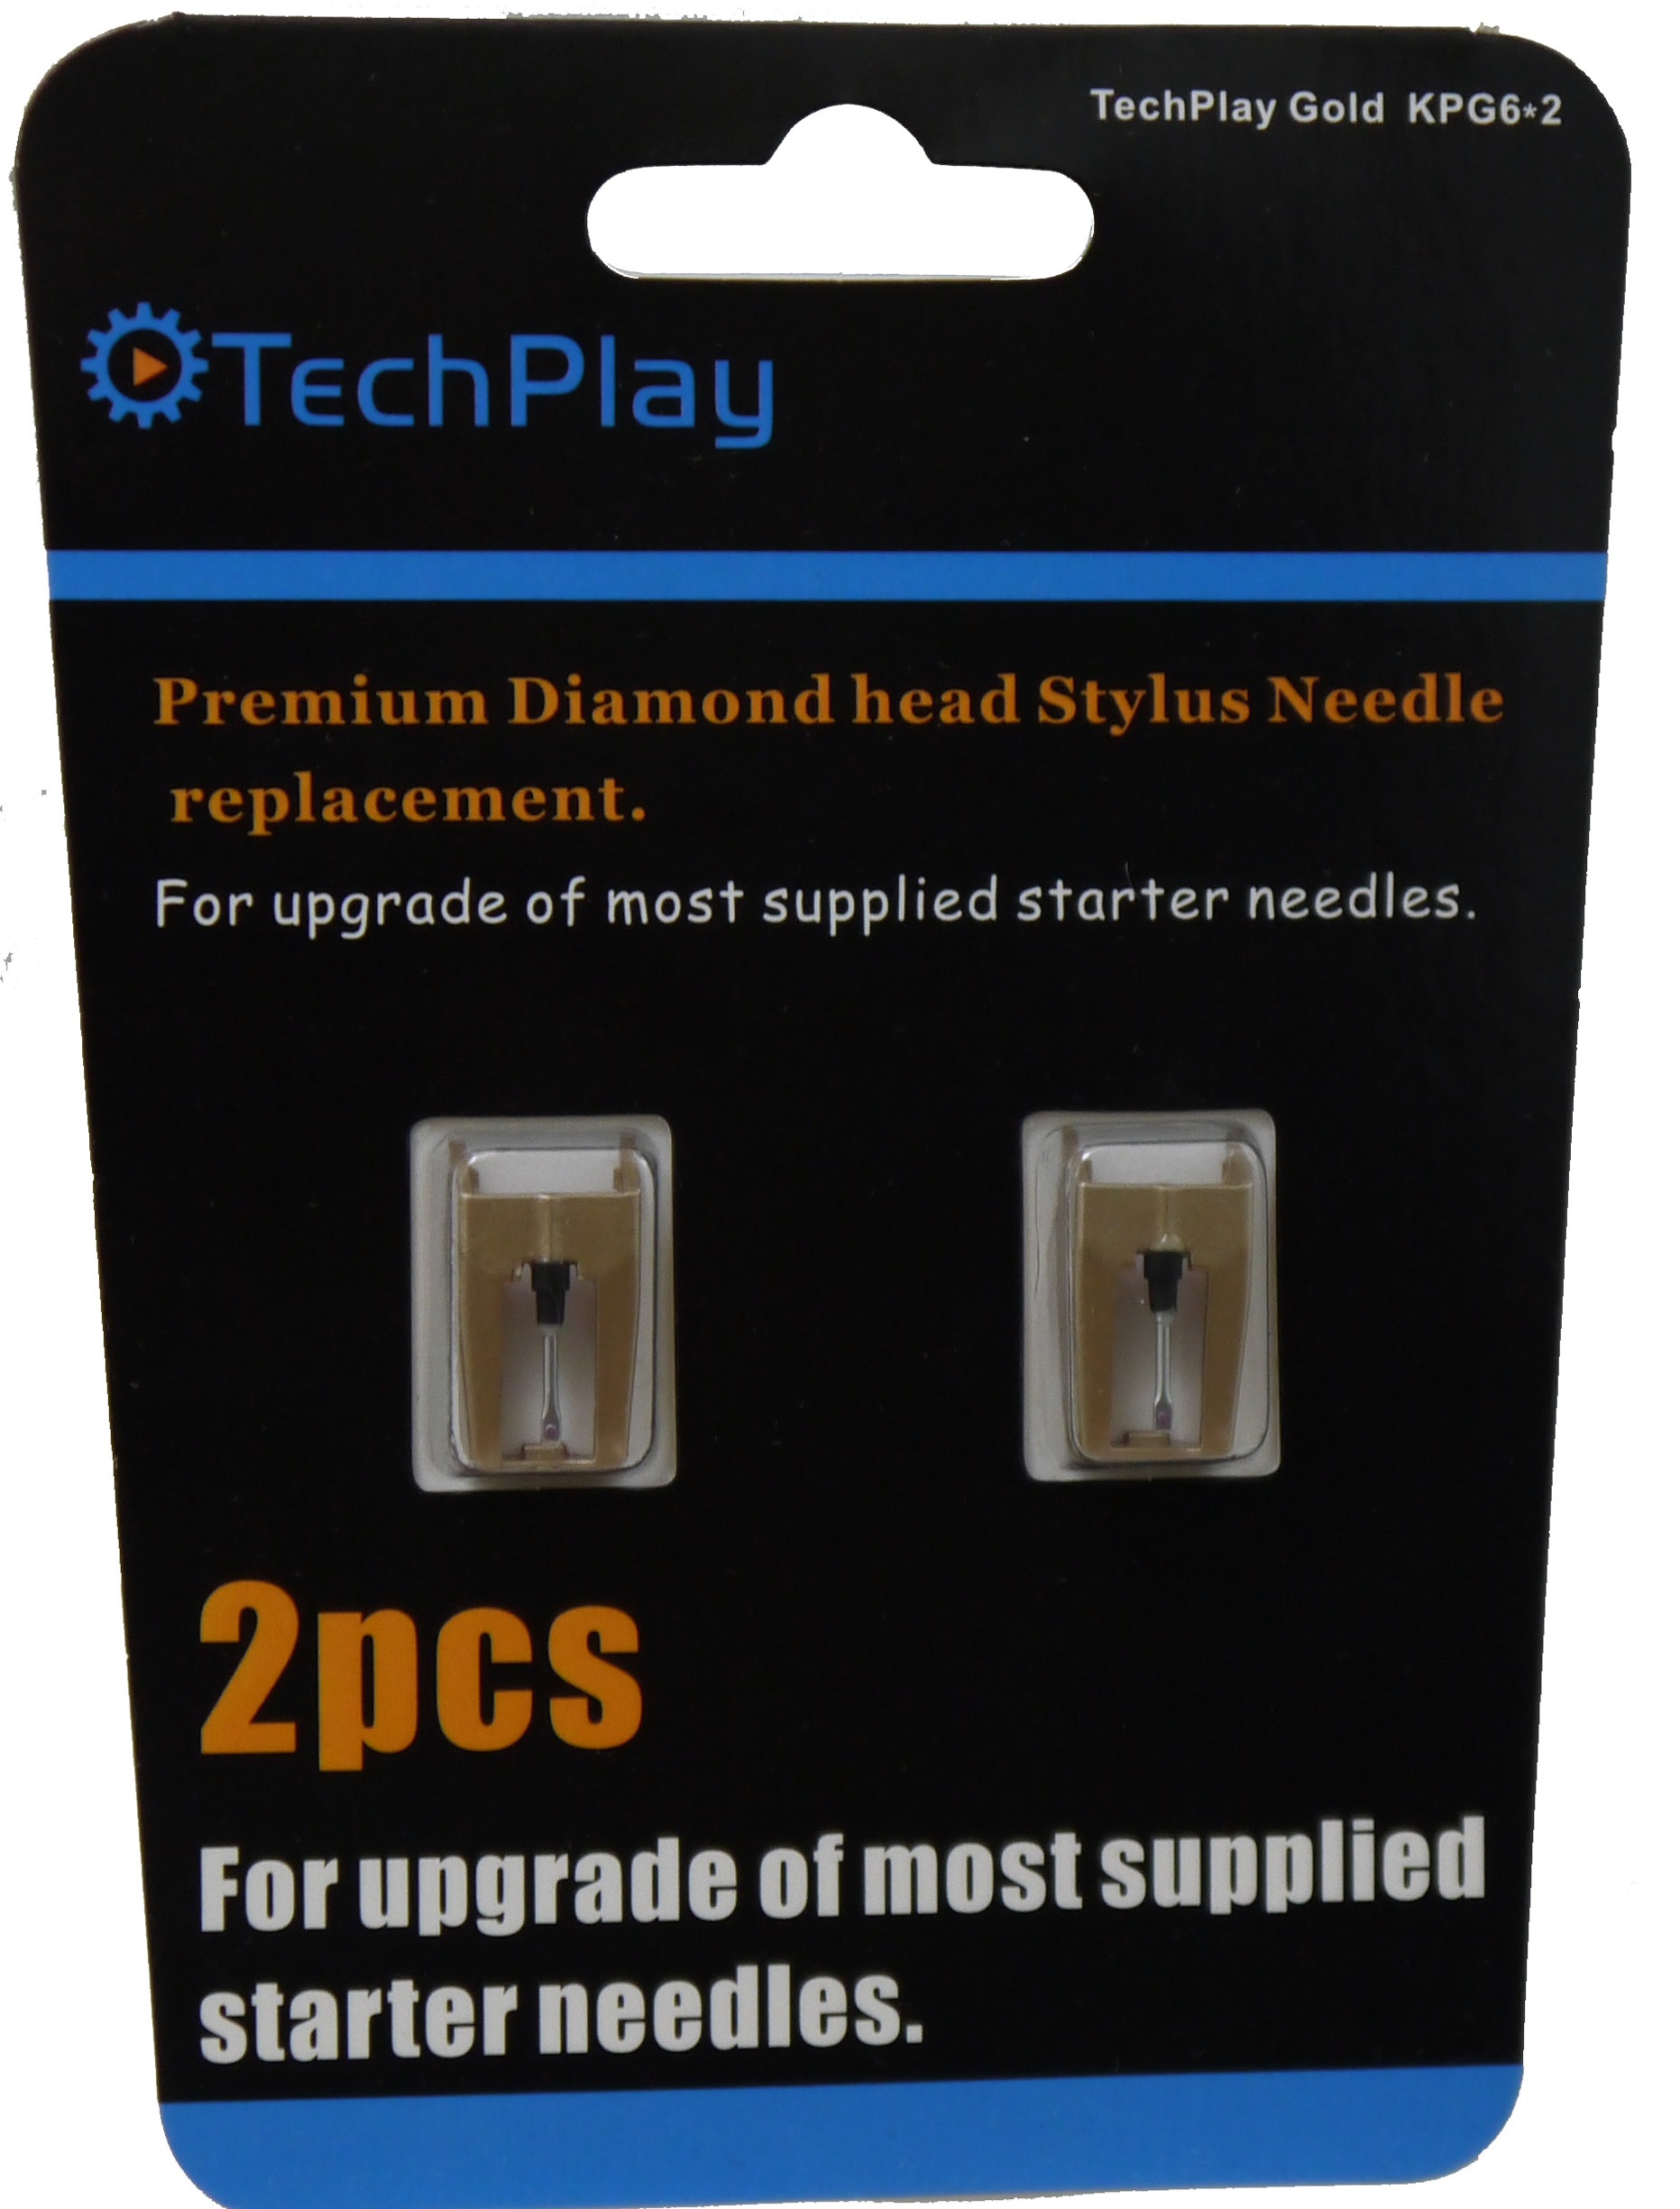 TechPlay Gold, KPG6*2,pack of 2, Dimond tipped needle for Turnta